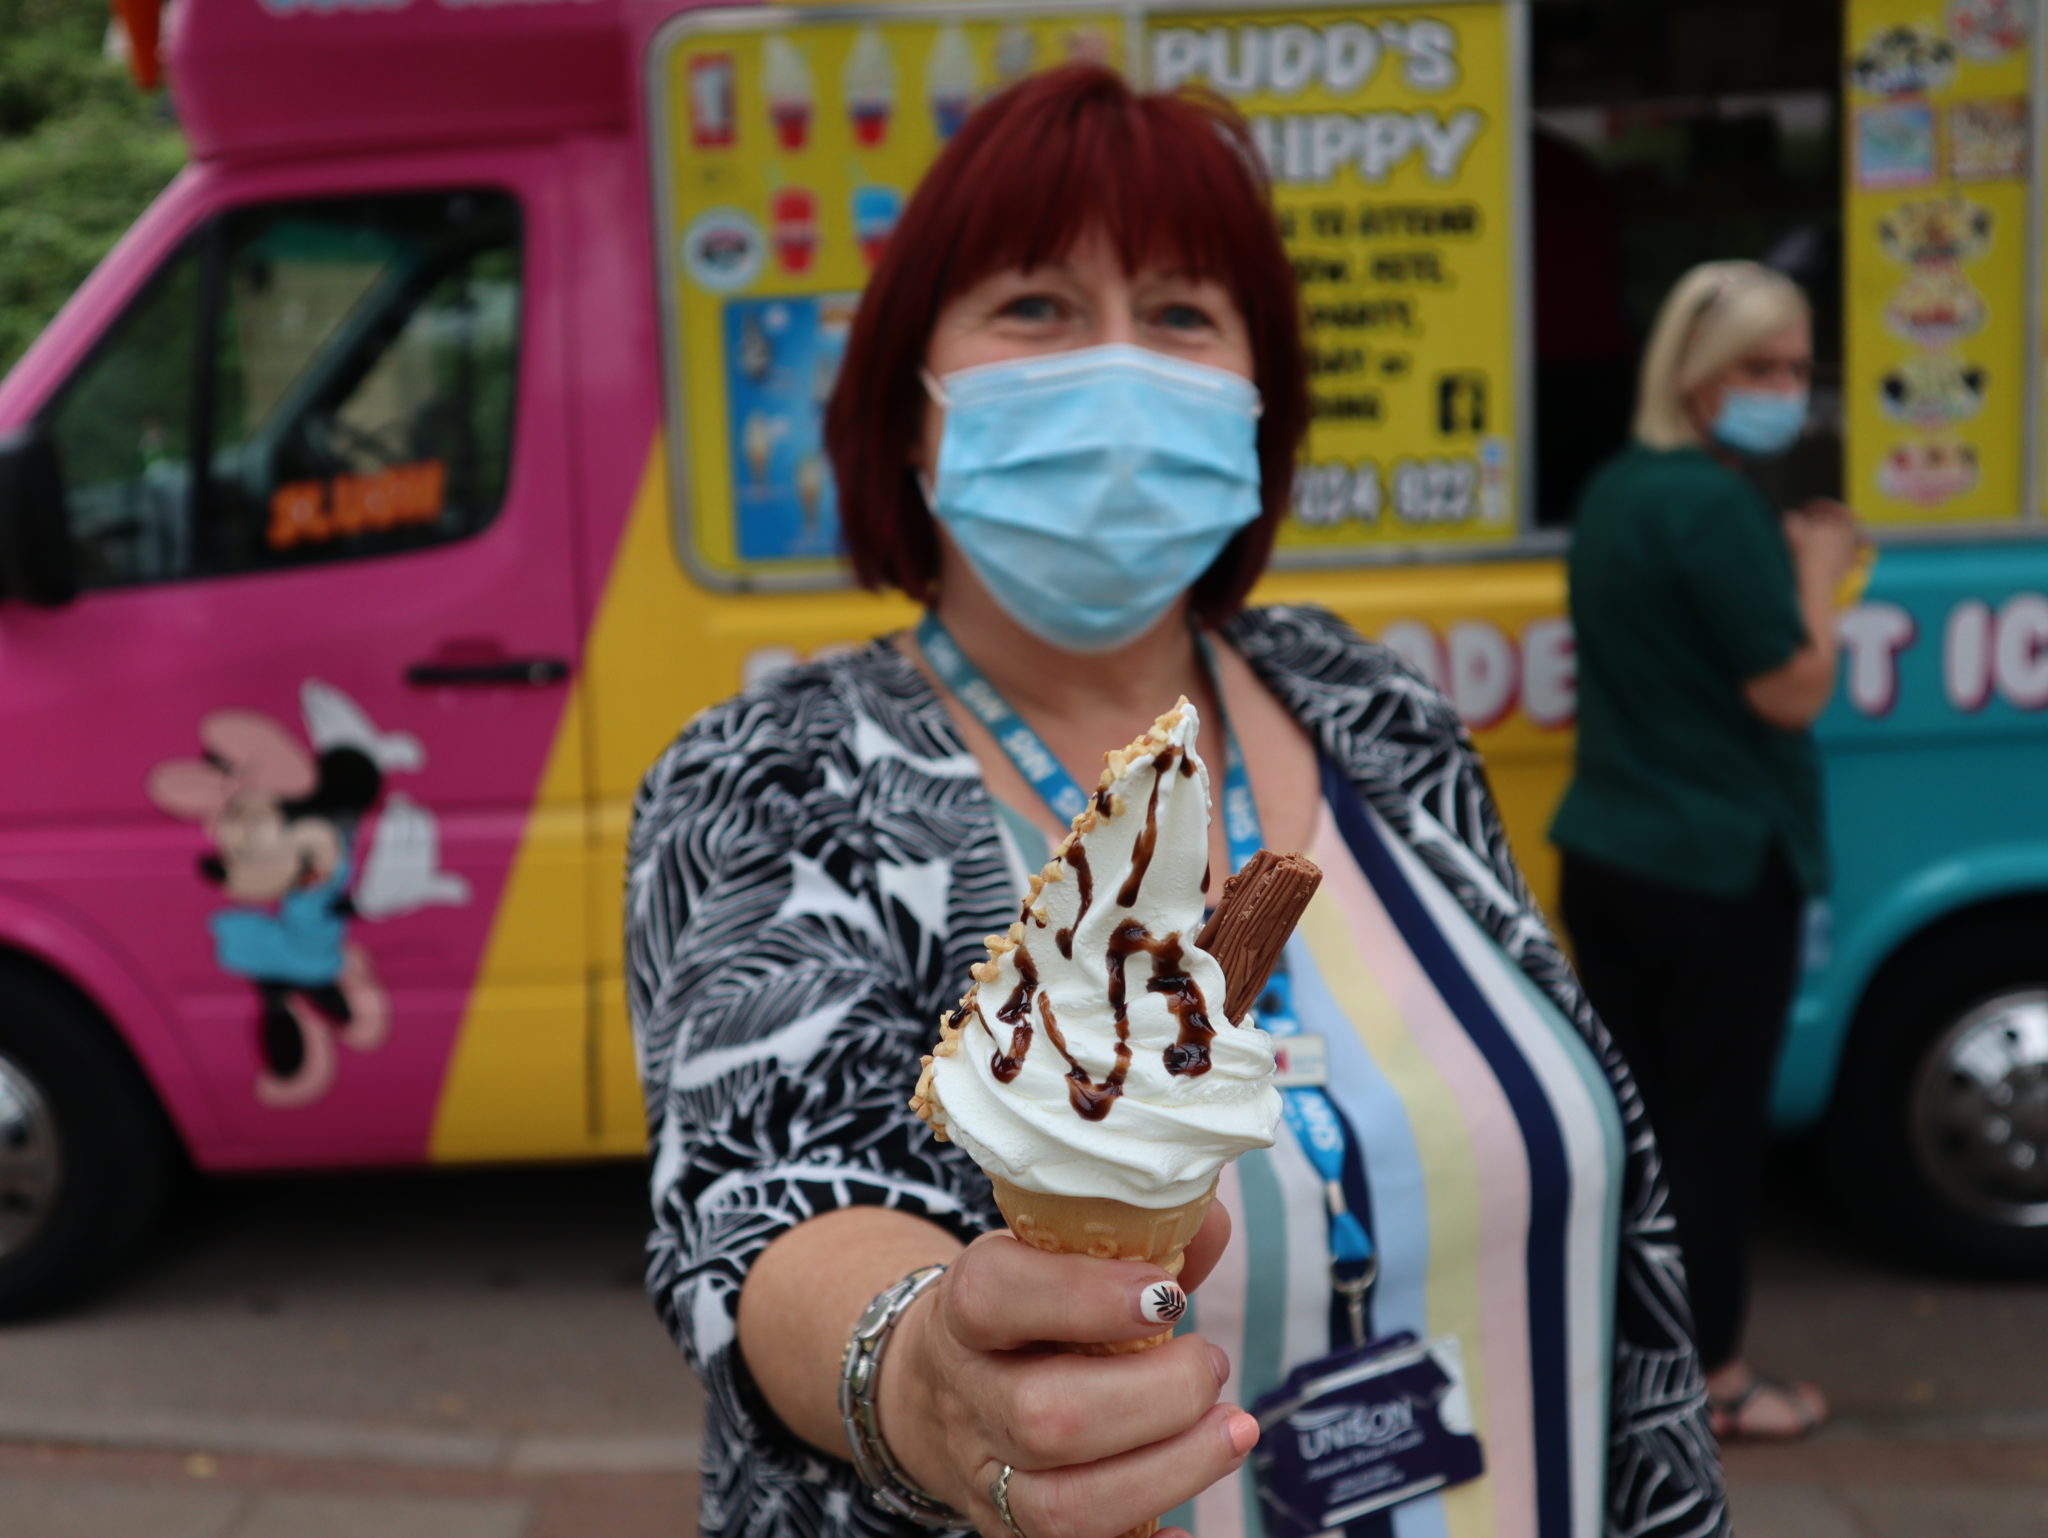 A woman with an ice cream